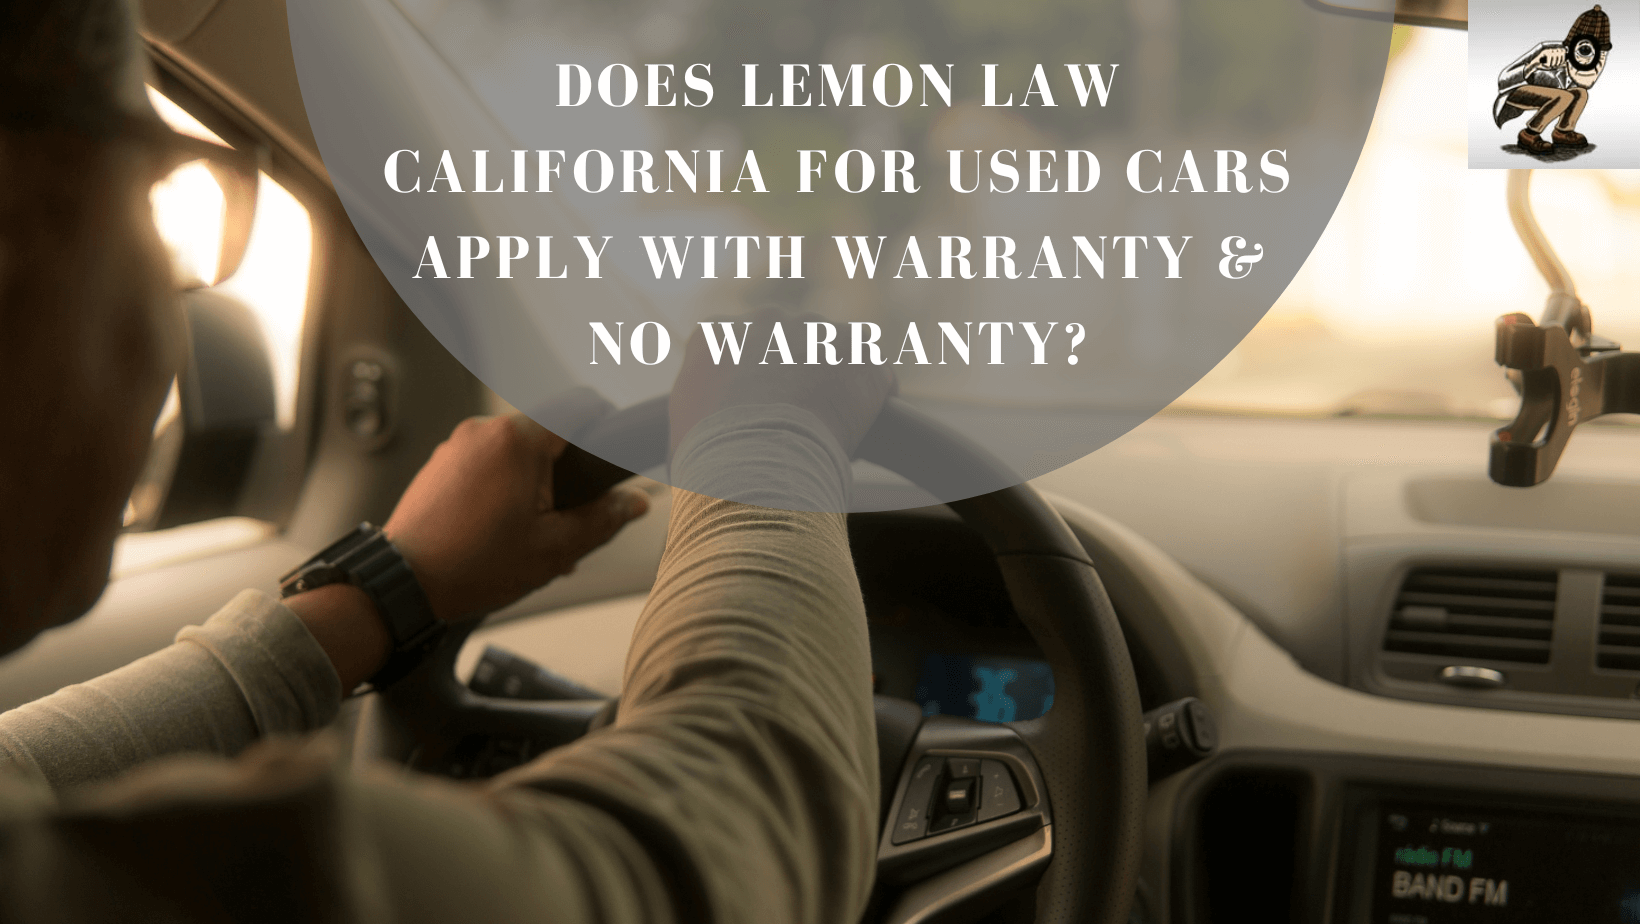 Do lemon laws apply to used cars